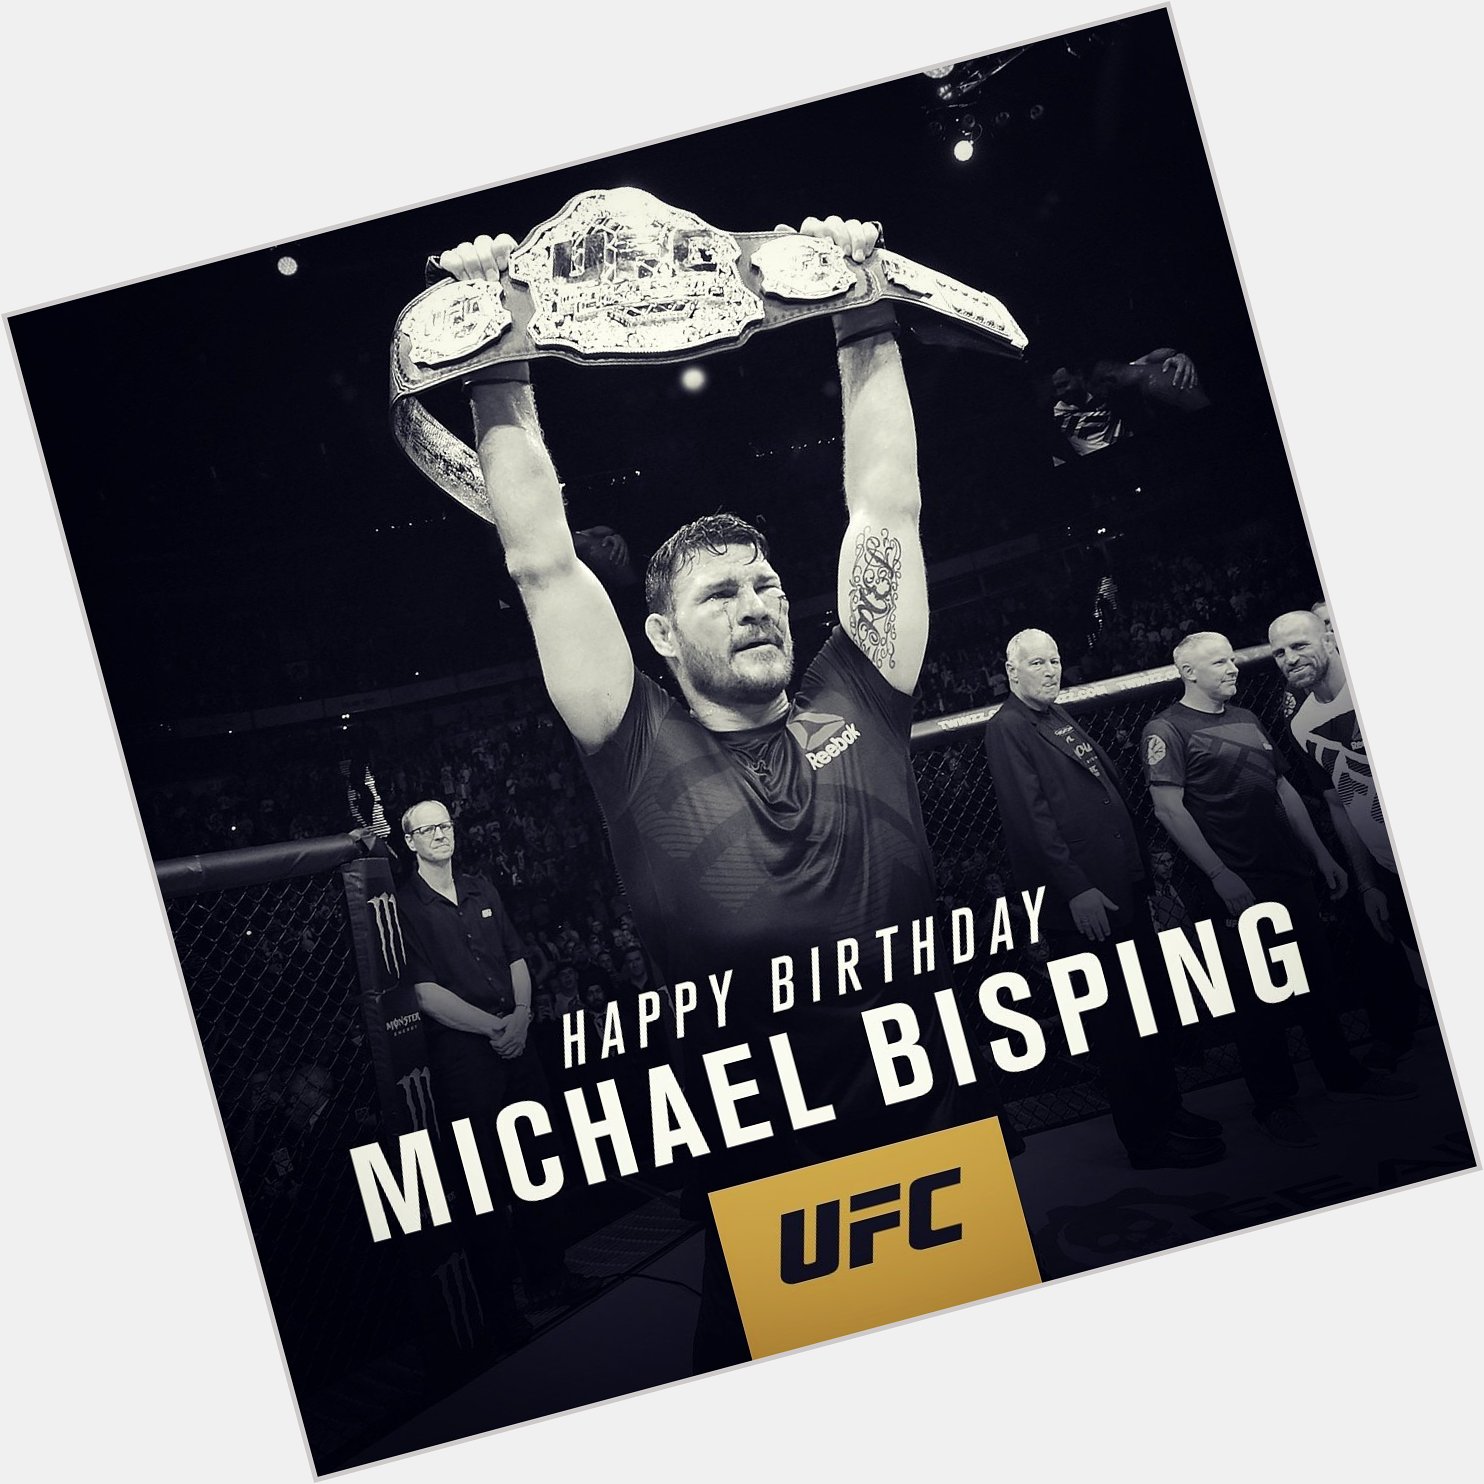 Michael bisping birthday u do not know when was his birthday.but really happy him . 